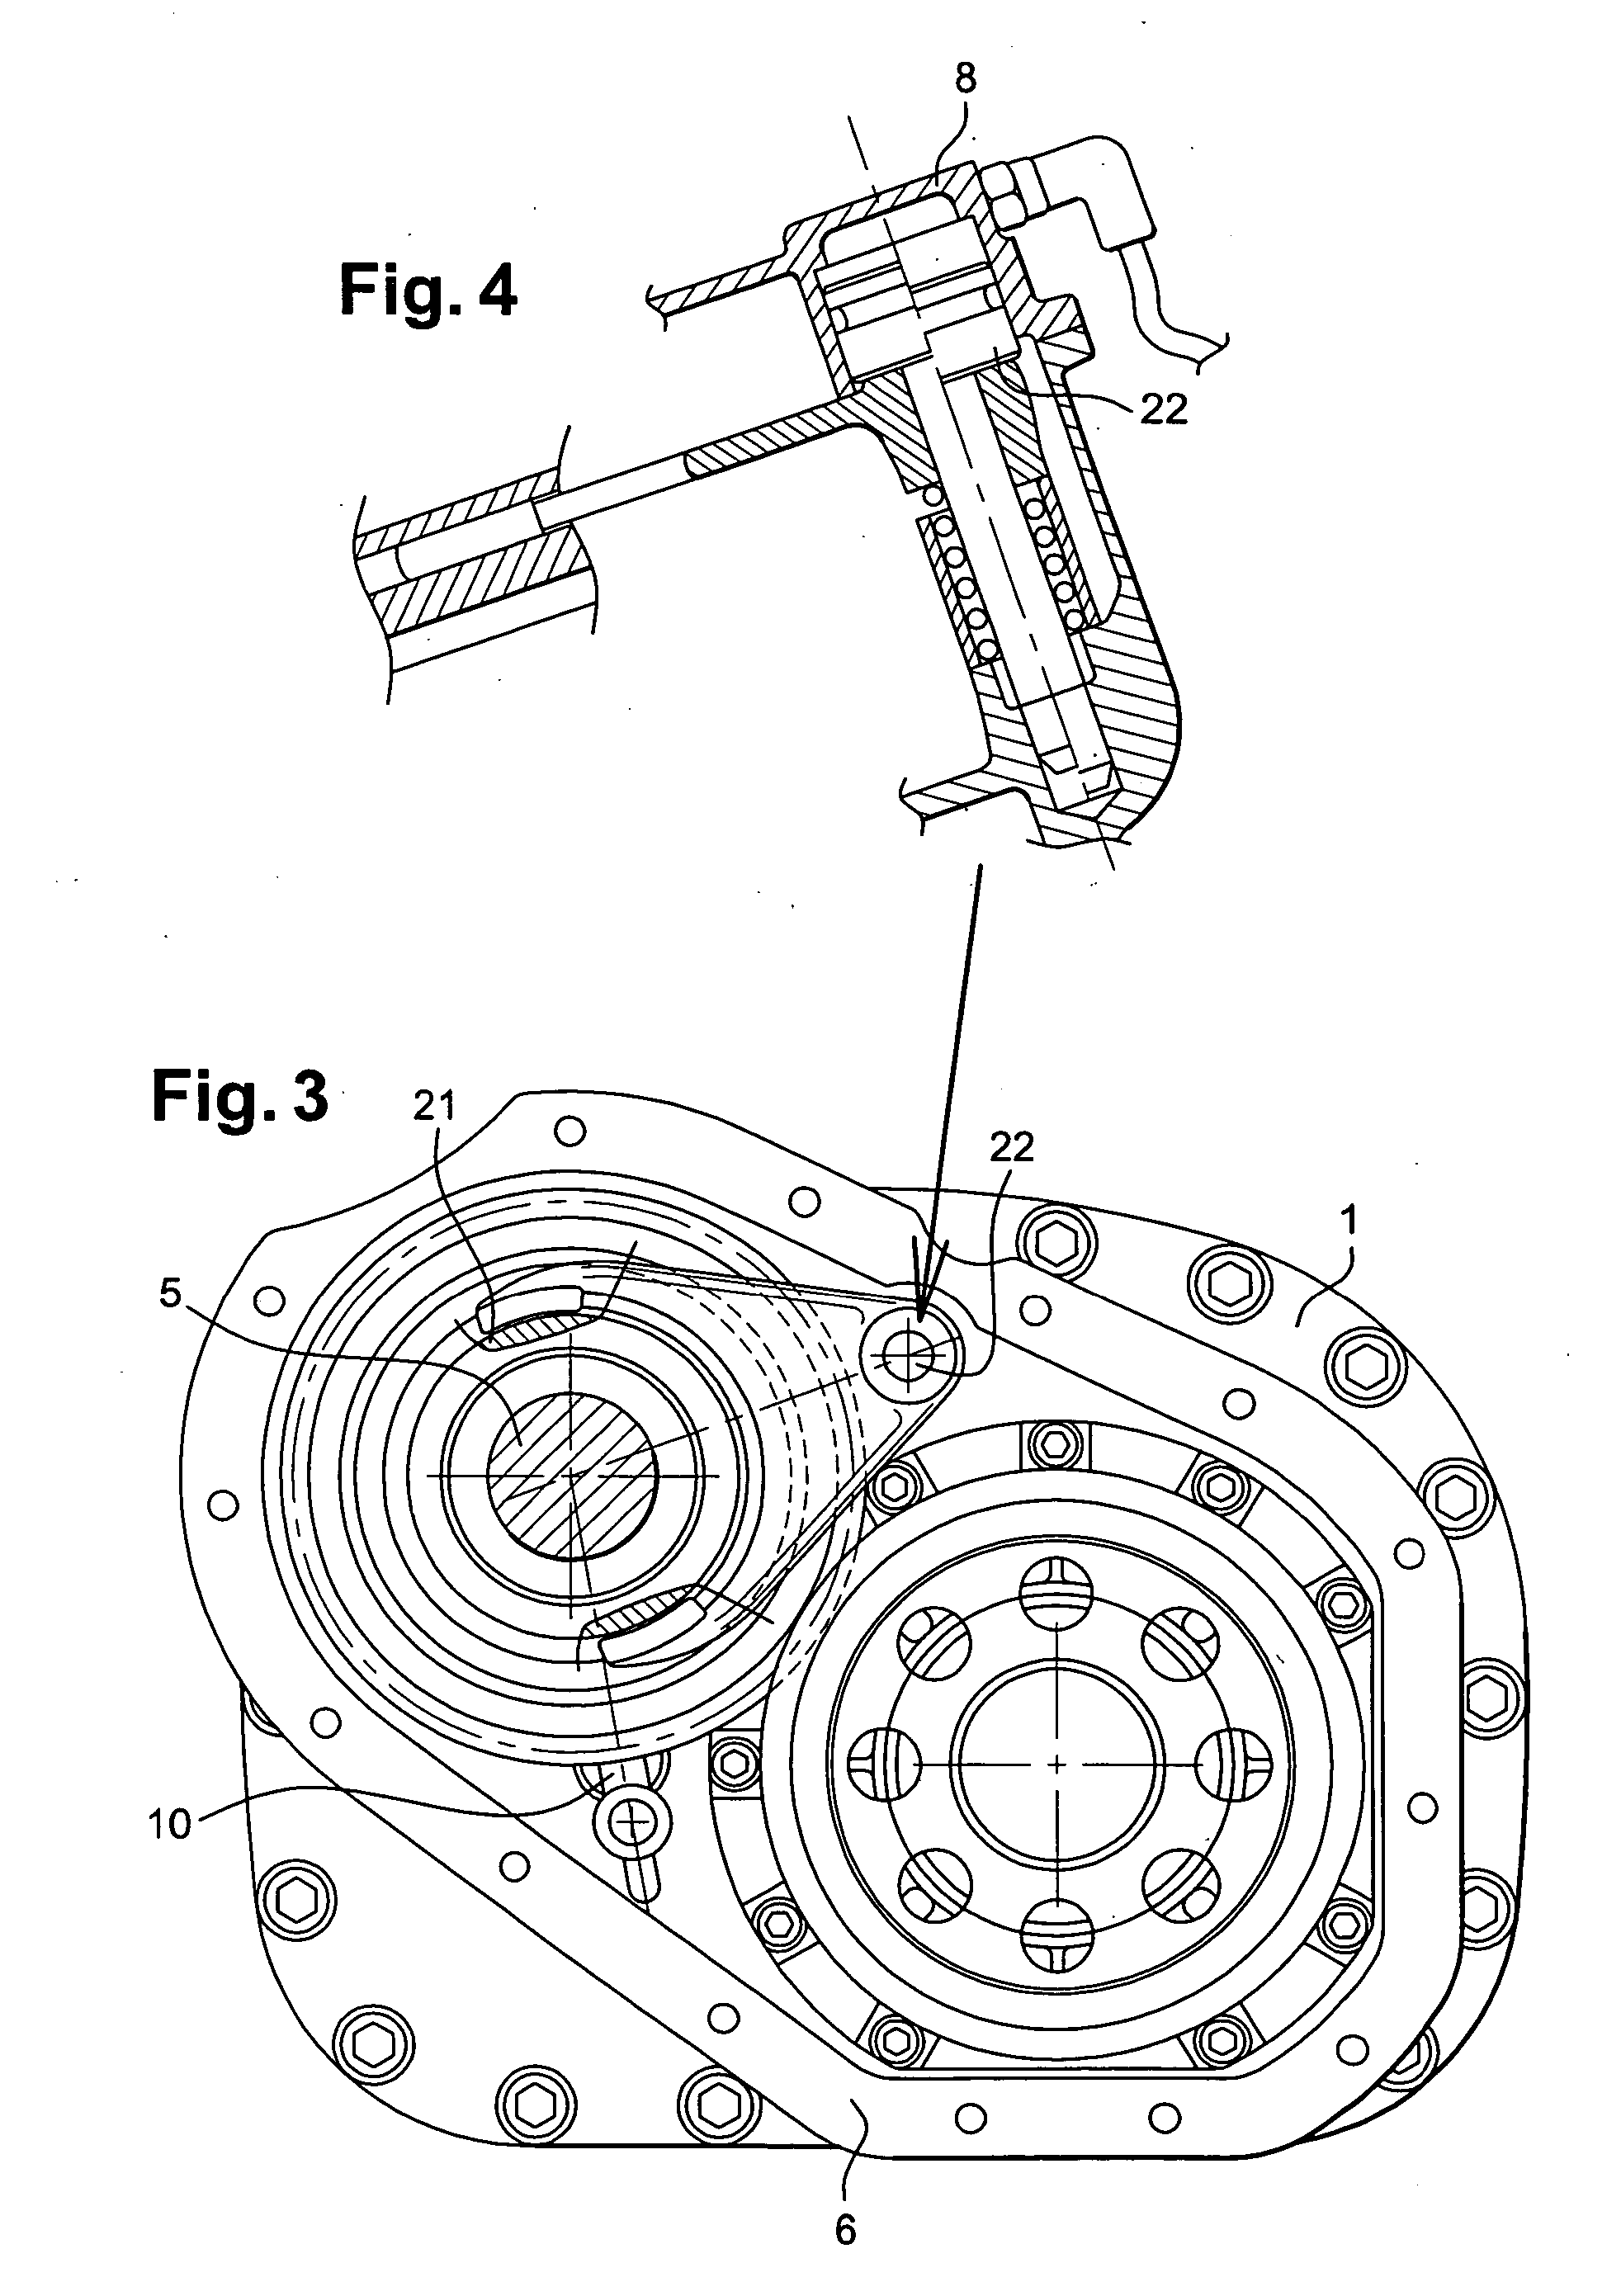 Mechanical adapter assembly